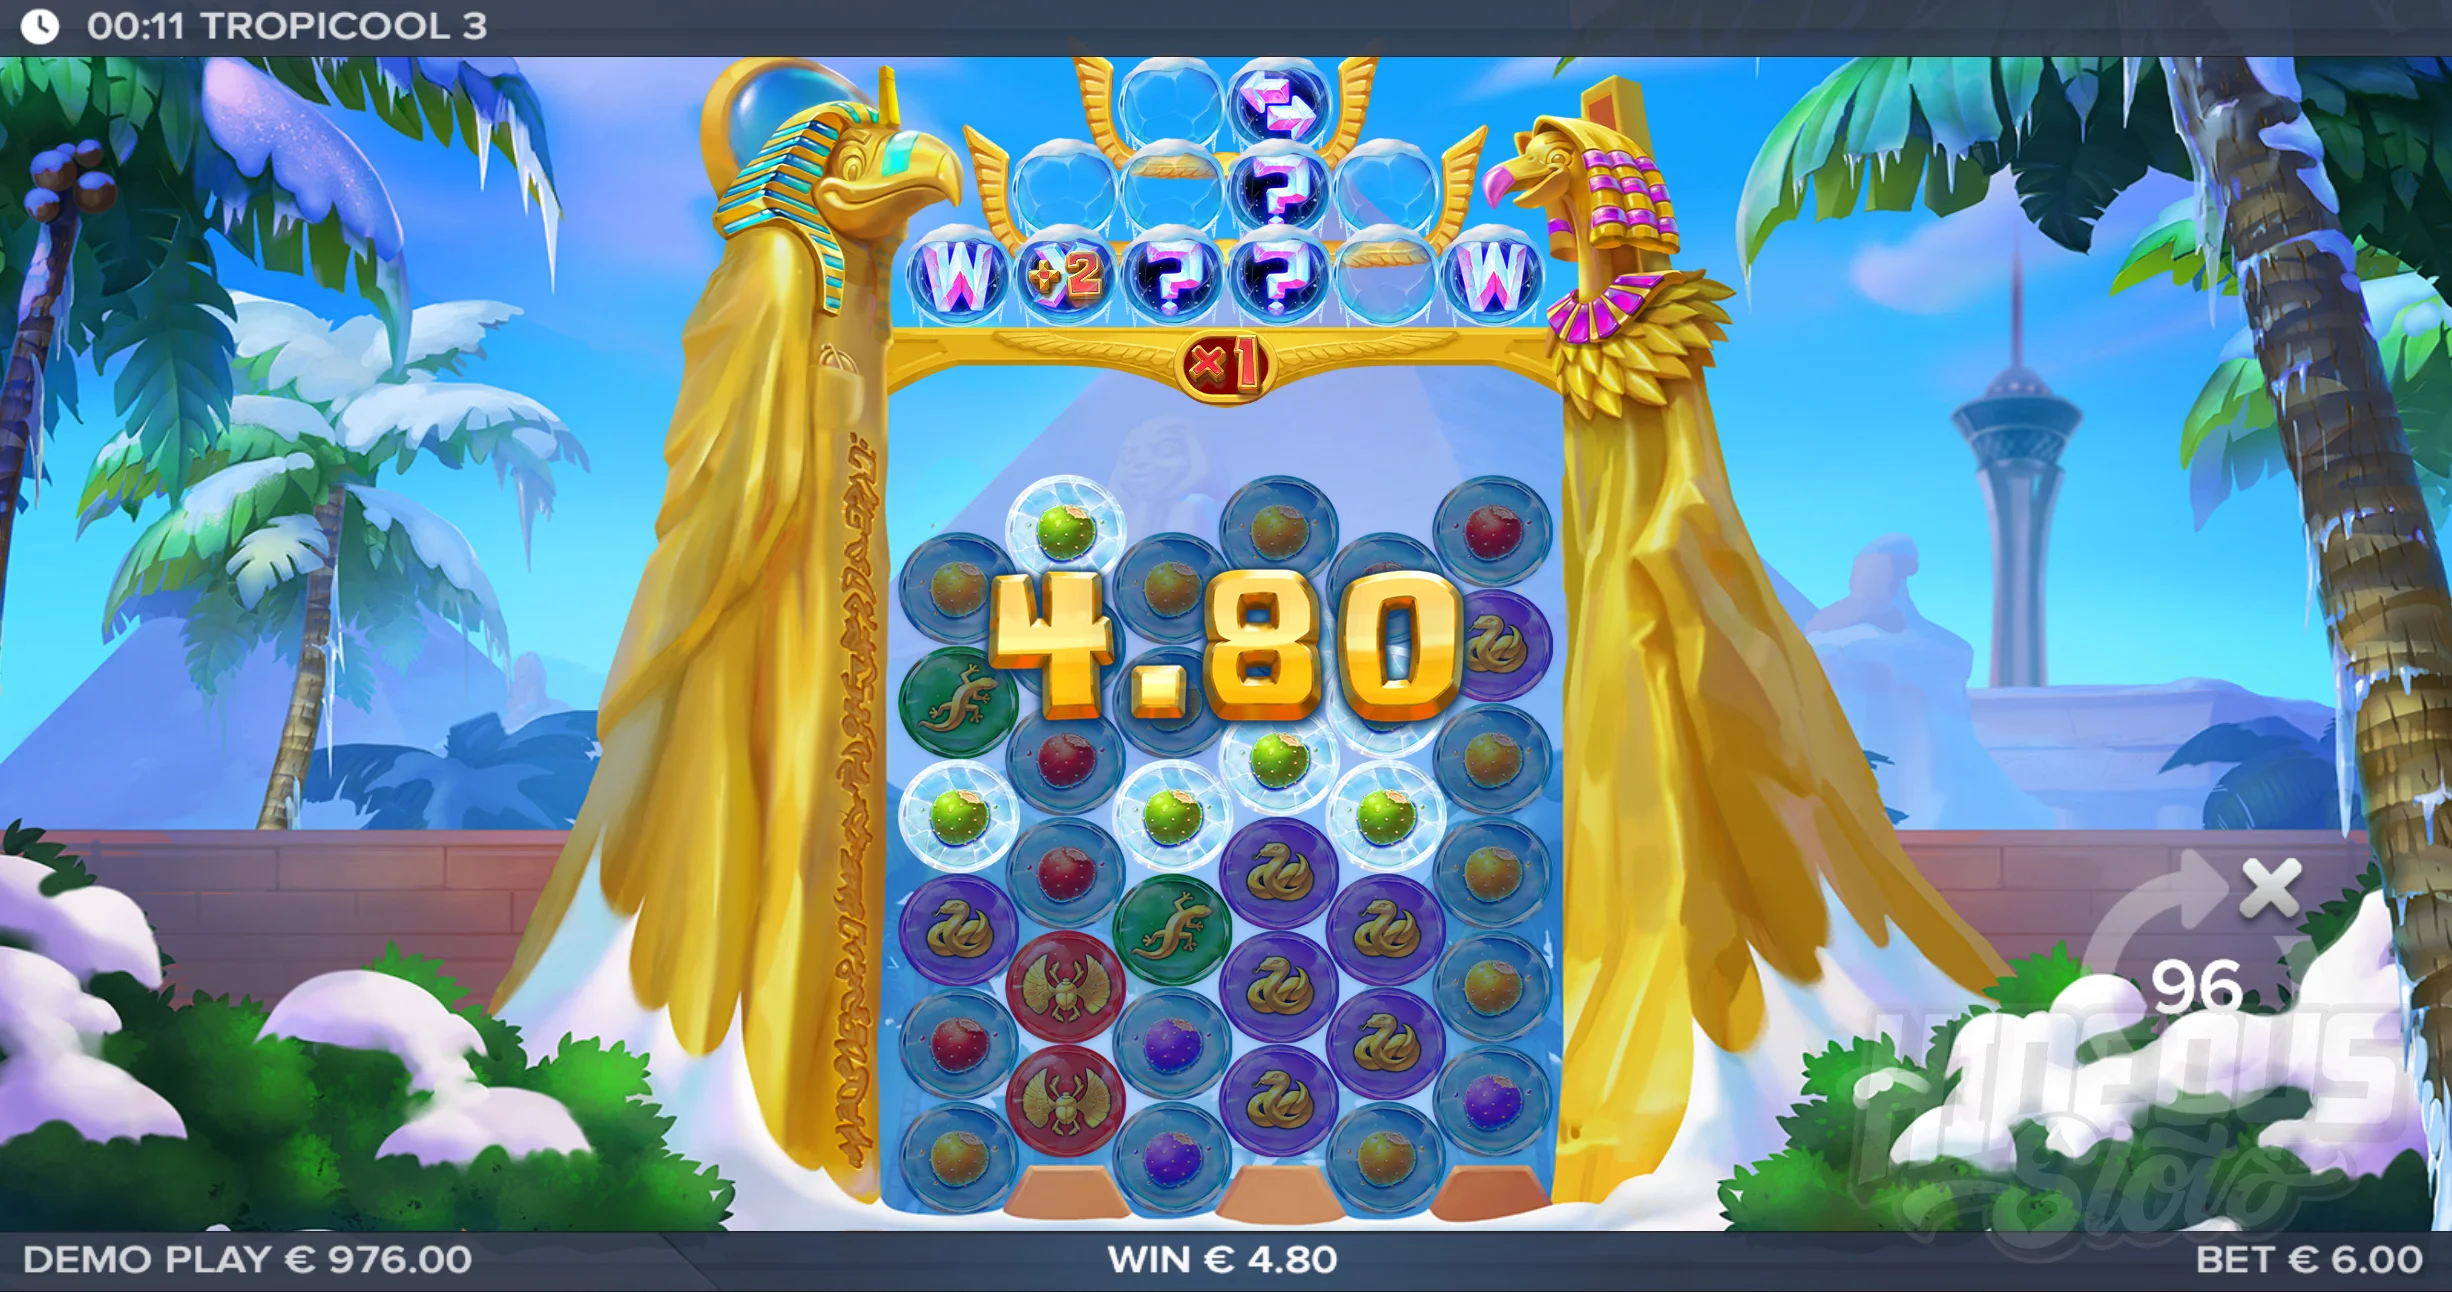 Tropicool 3 Offers Players 46,656 Ways to Win